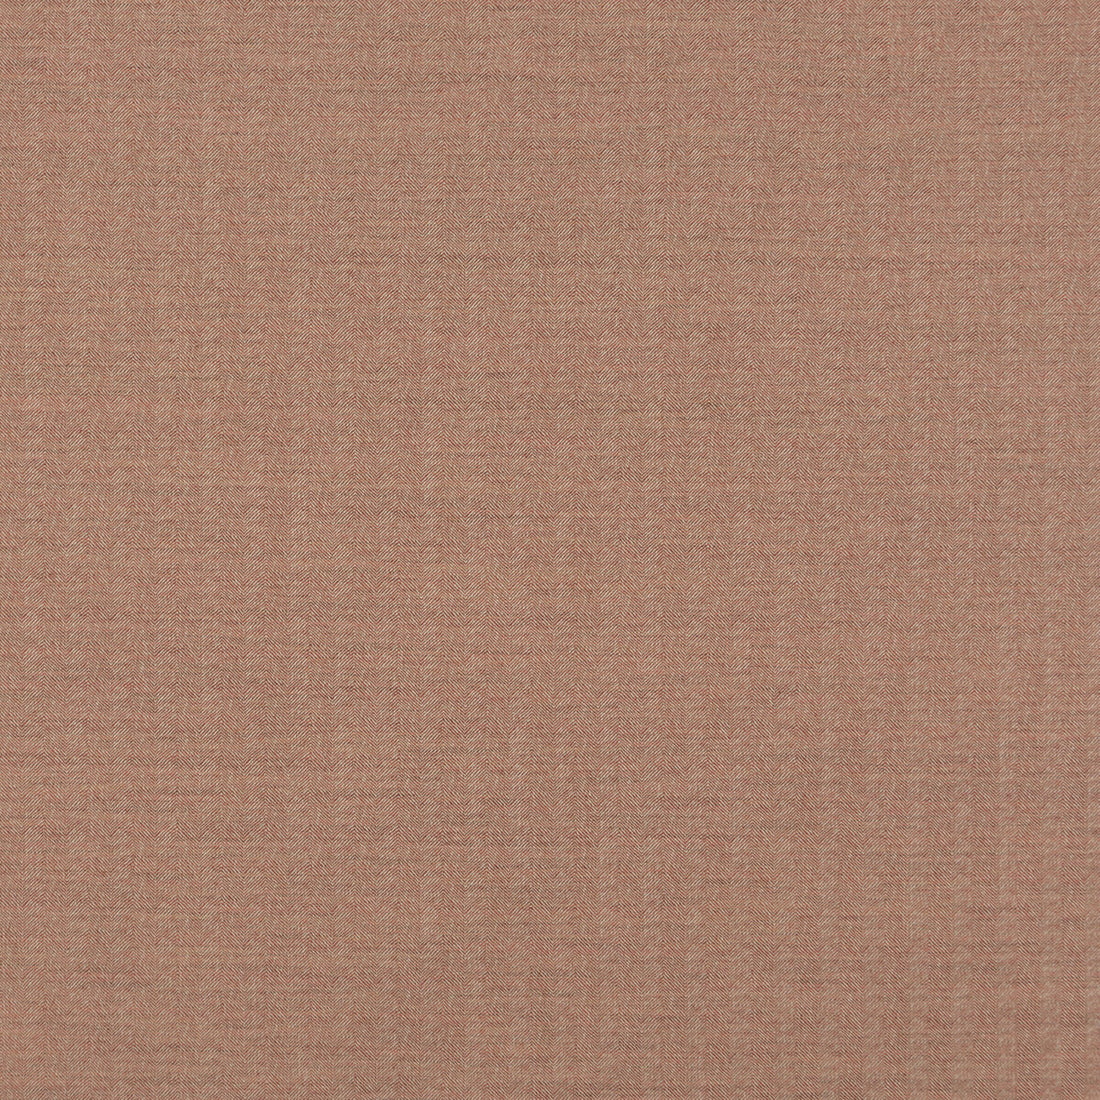 Canyon fabric in spice color - pattern BF10680.330.0 - by G P &amp; J Baker in the Essential Colours collection